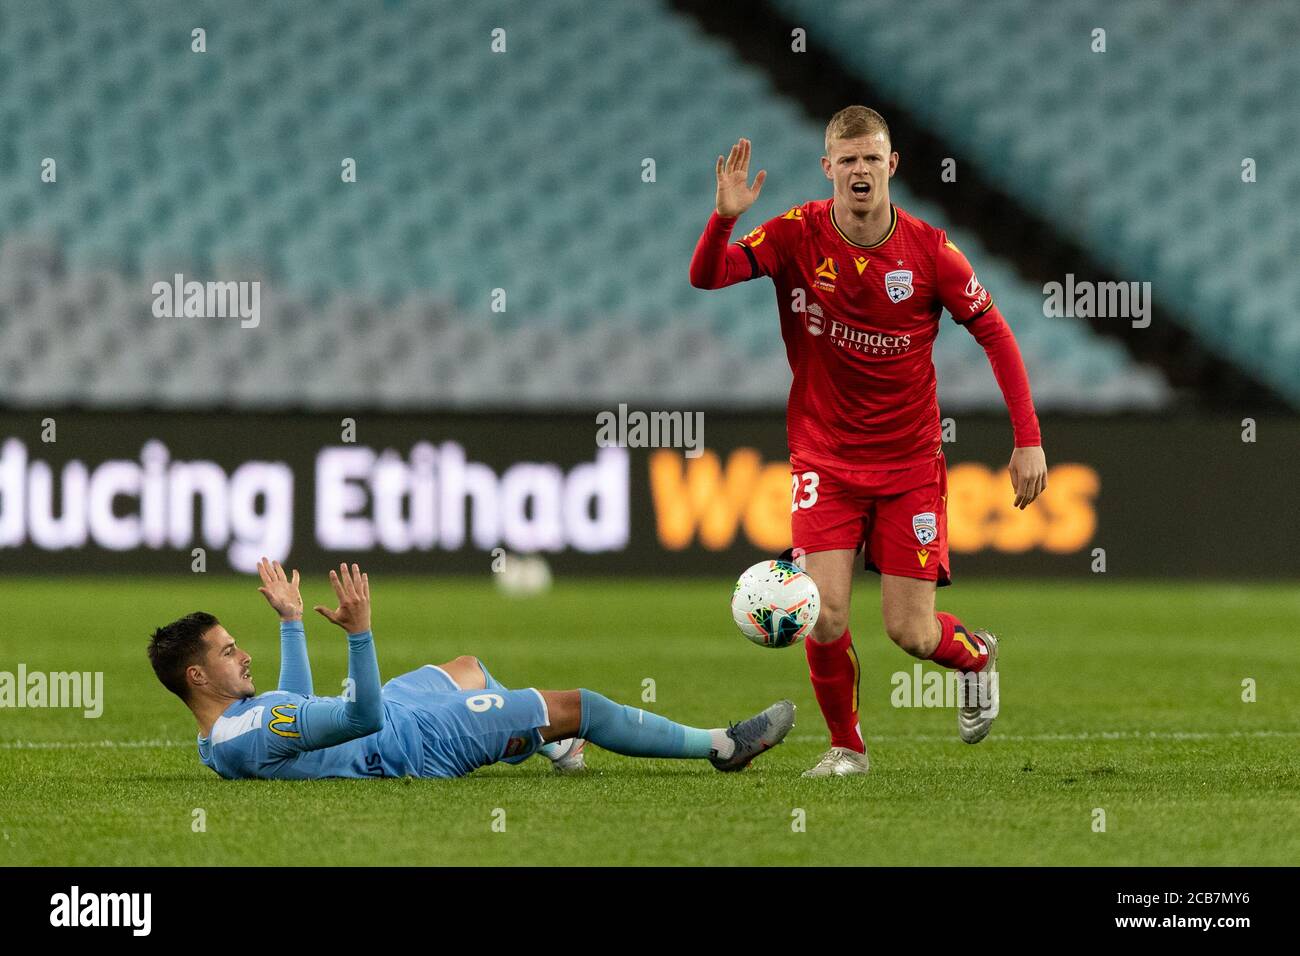 Sydney, Australia. 11th Aug, 2020. Adelaide United defender Jordan Elsey  (23) wins the ball during the Hyundai A League match between Melbourne City  and Adelaide United at the ANZ Stadium, Sydney, Australia